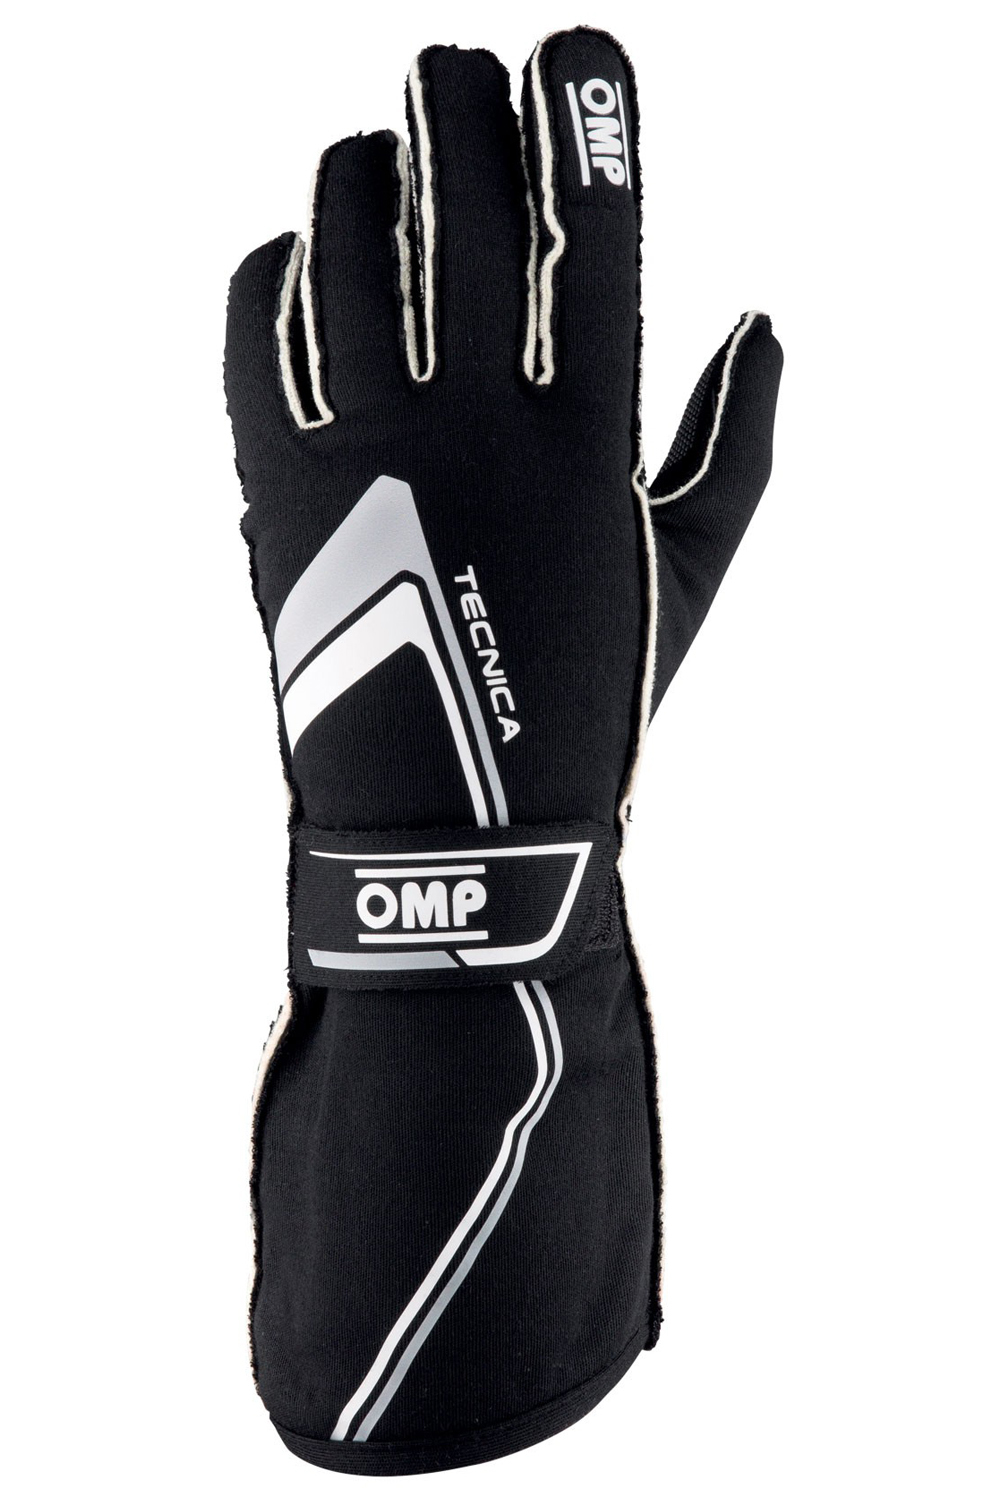 OMP Racing IB772NWM - Gloves, Tecnica, Driving, FIA Approved, Double Layer, Fire Retardant Fabric, White, Medium, Pair